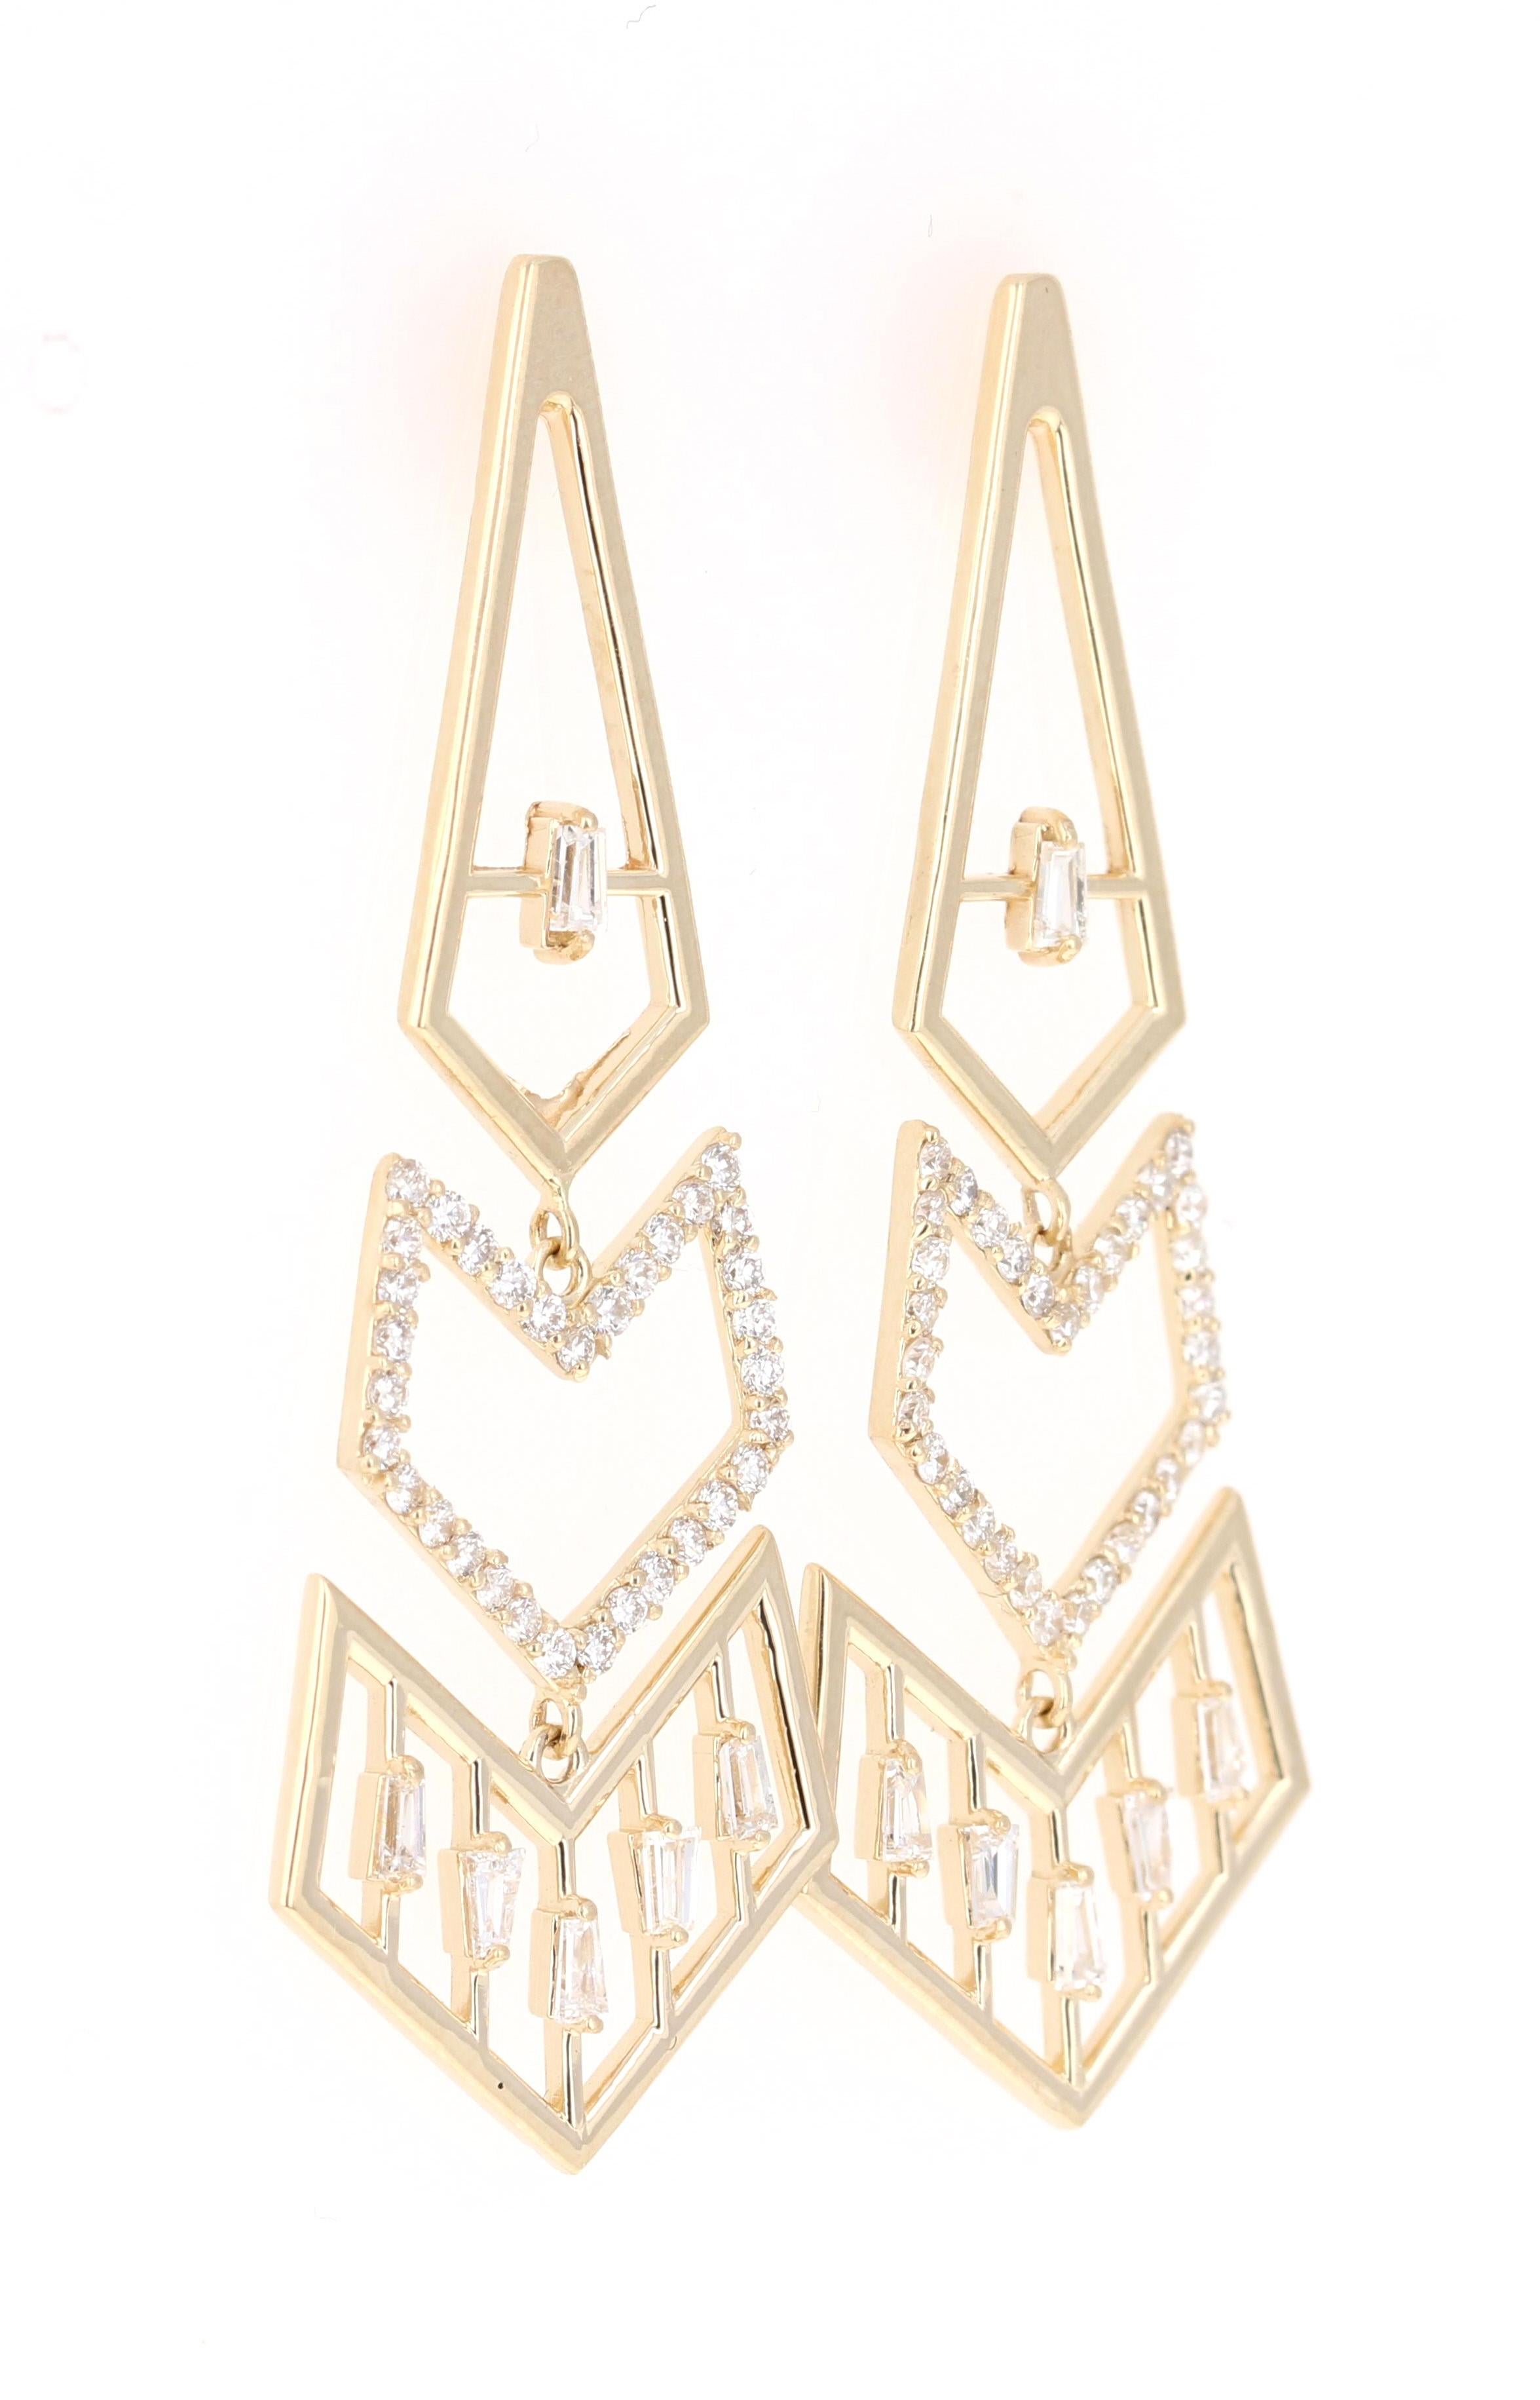 These Earrings are inspired by the Art-Deco Era. 
The Earrings have 12 Baguette Cut Diamonds that weigh 0.40 Carats and 66 Round Cut Diamonds that weigh 0.52 Carats. 
The total carat weight of the earrings are 0.92 Carats. (Clarity: SI1, Color: F)